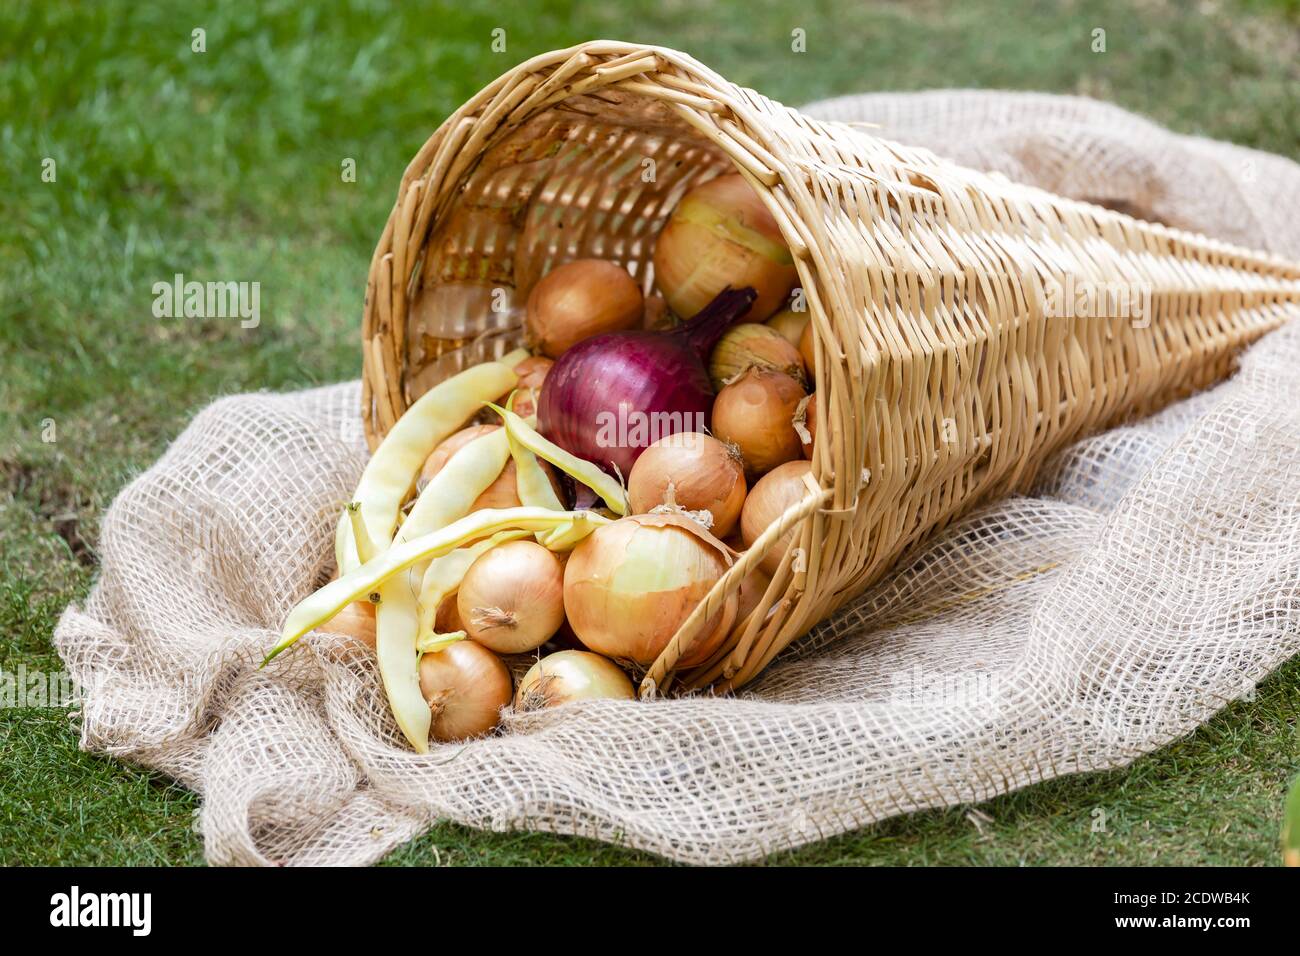 Wicker cornucopia with onions and yellow beans on a green lawn for Thanksgiving Stock Photo